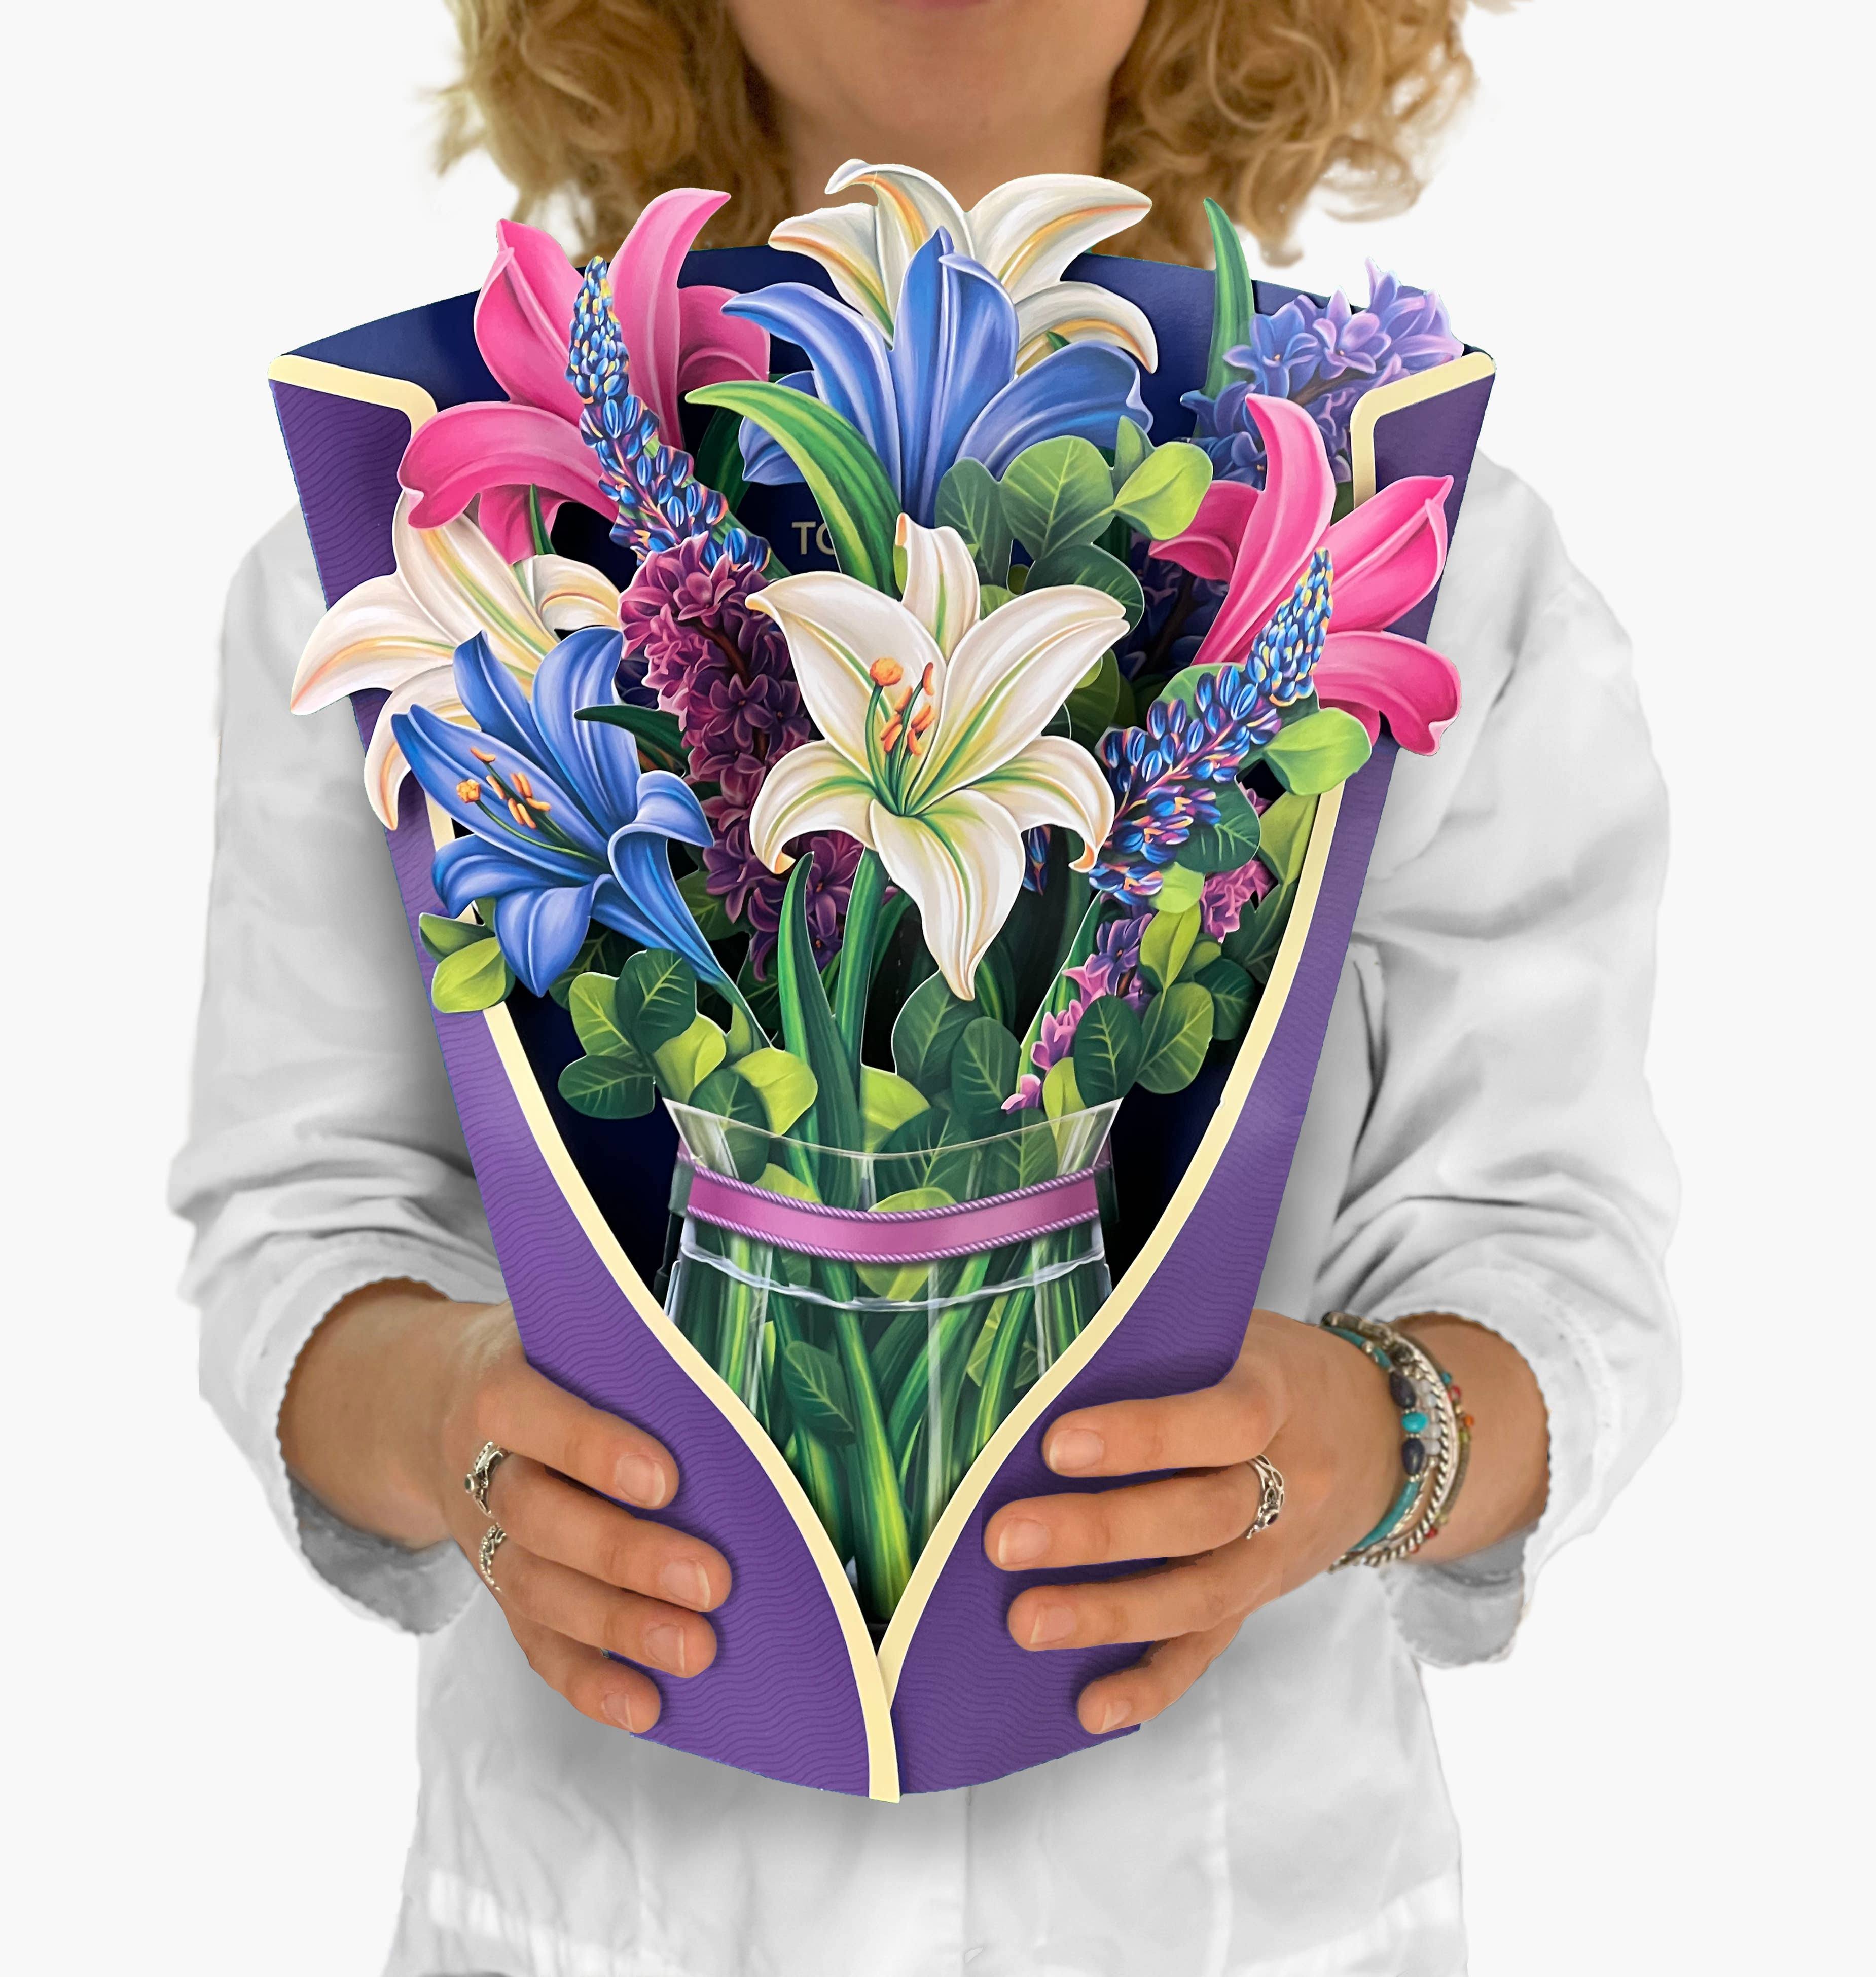 Lilies & Lupines Pop Up 3D Greeting Card